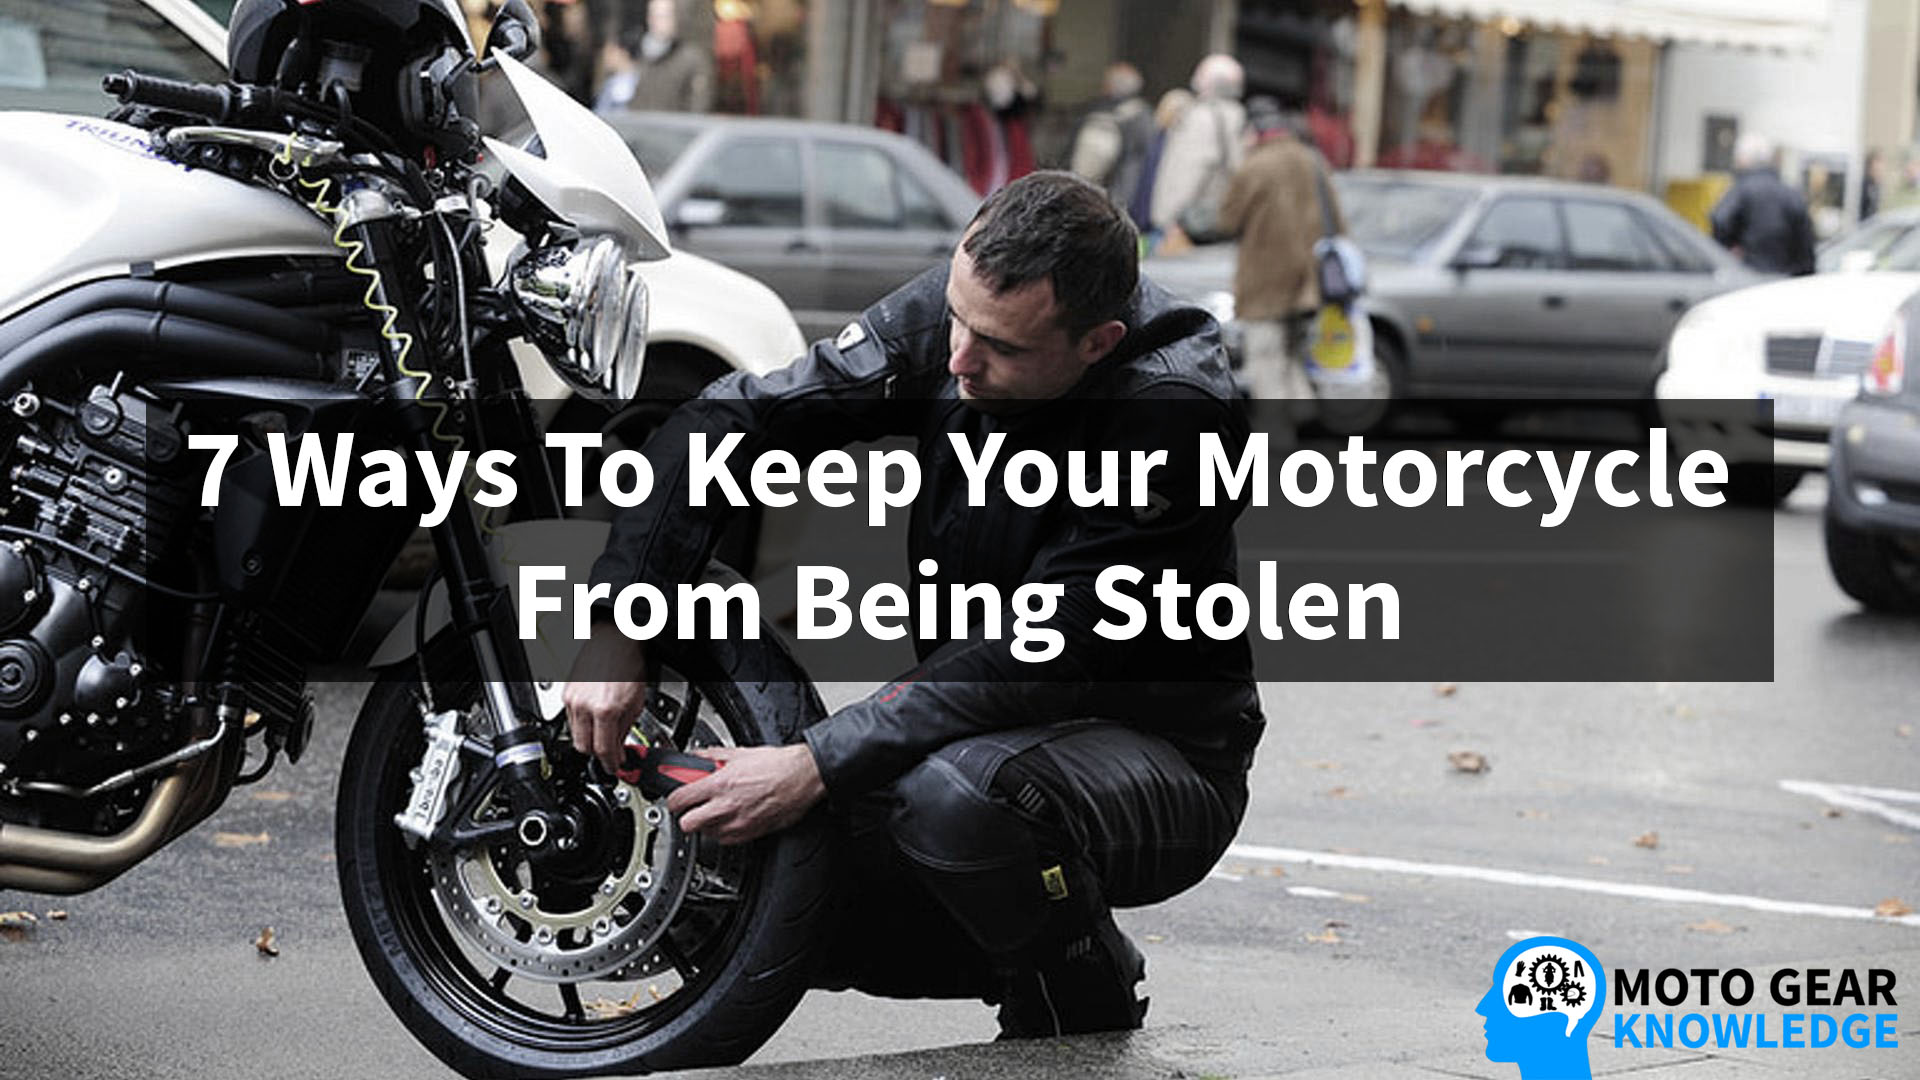 How To Keep Your Motorcycle From Being Stolen